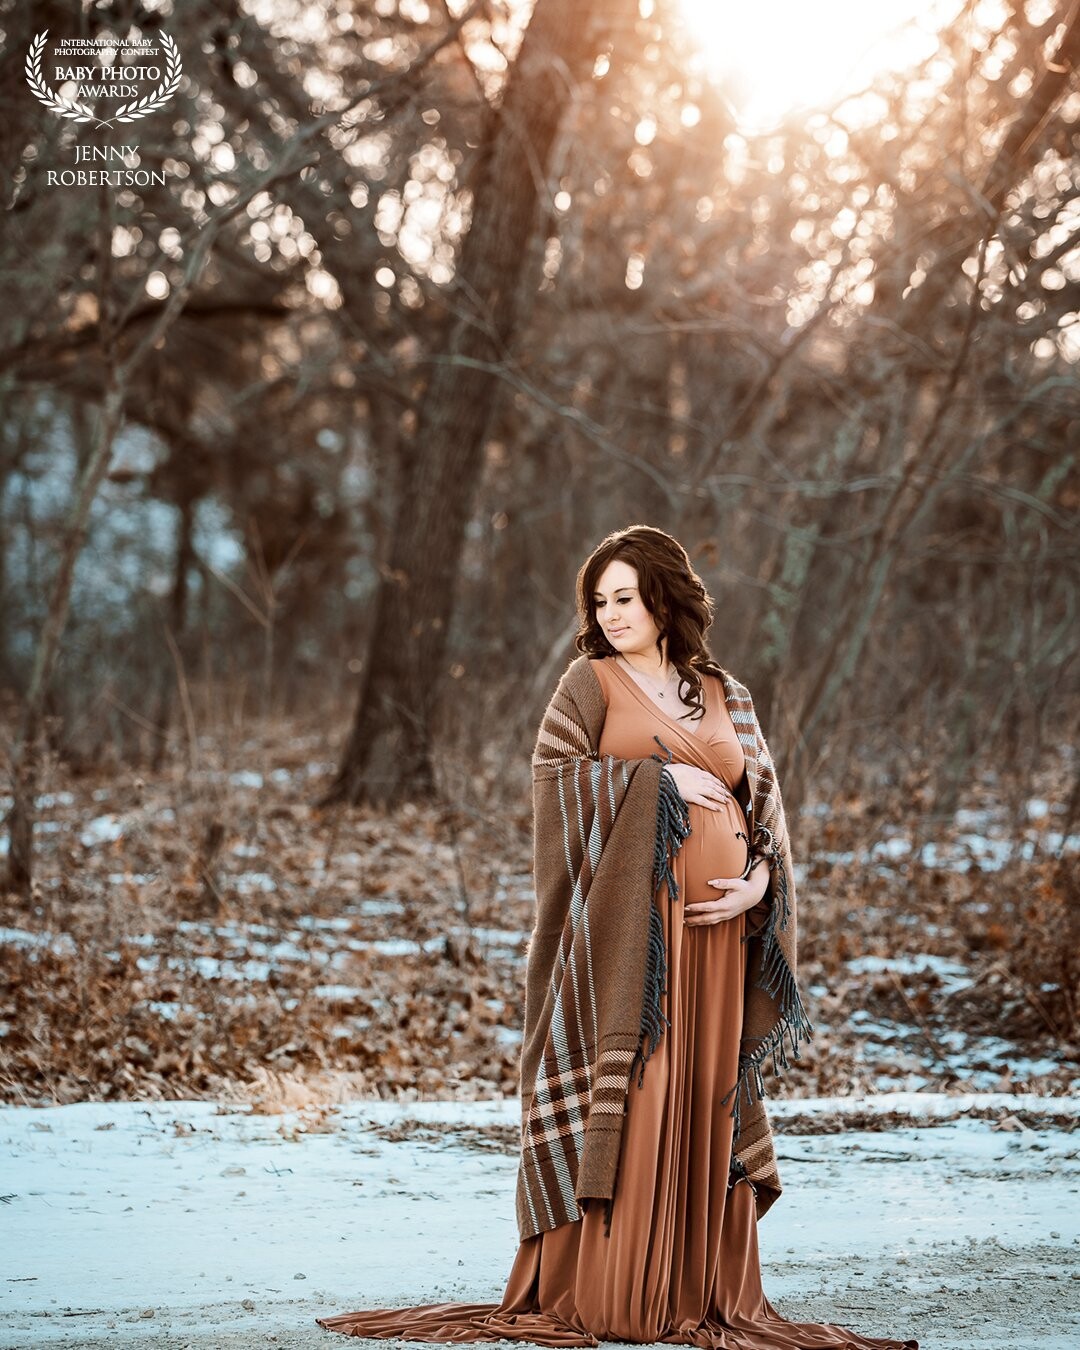 It was freezing this day but we went ahead with our session. It has been cropped out of this image but the sun was shining through the trees in the shape of a heart. It was so magical and a happy accident that I didn't see until I loaded my images for editing.